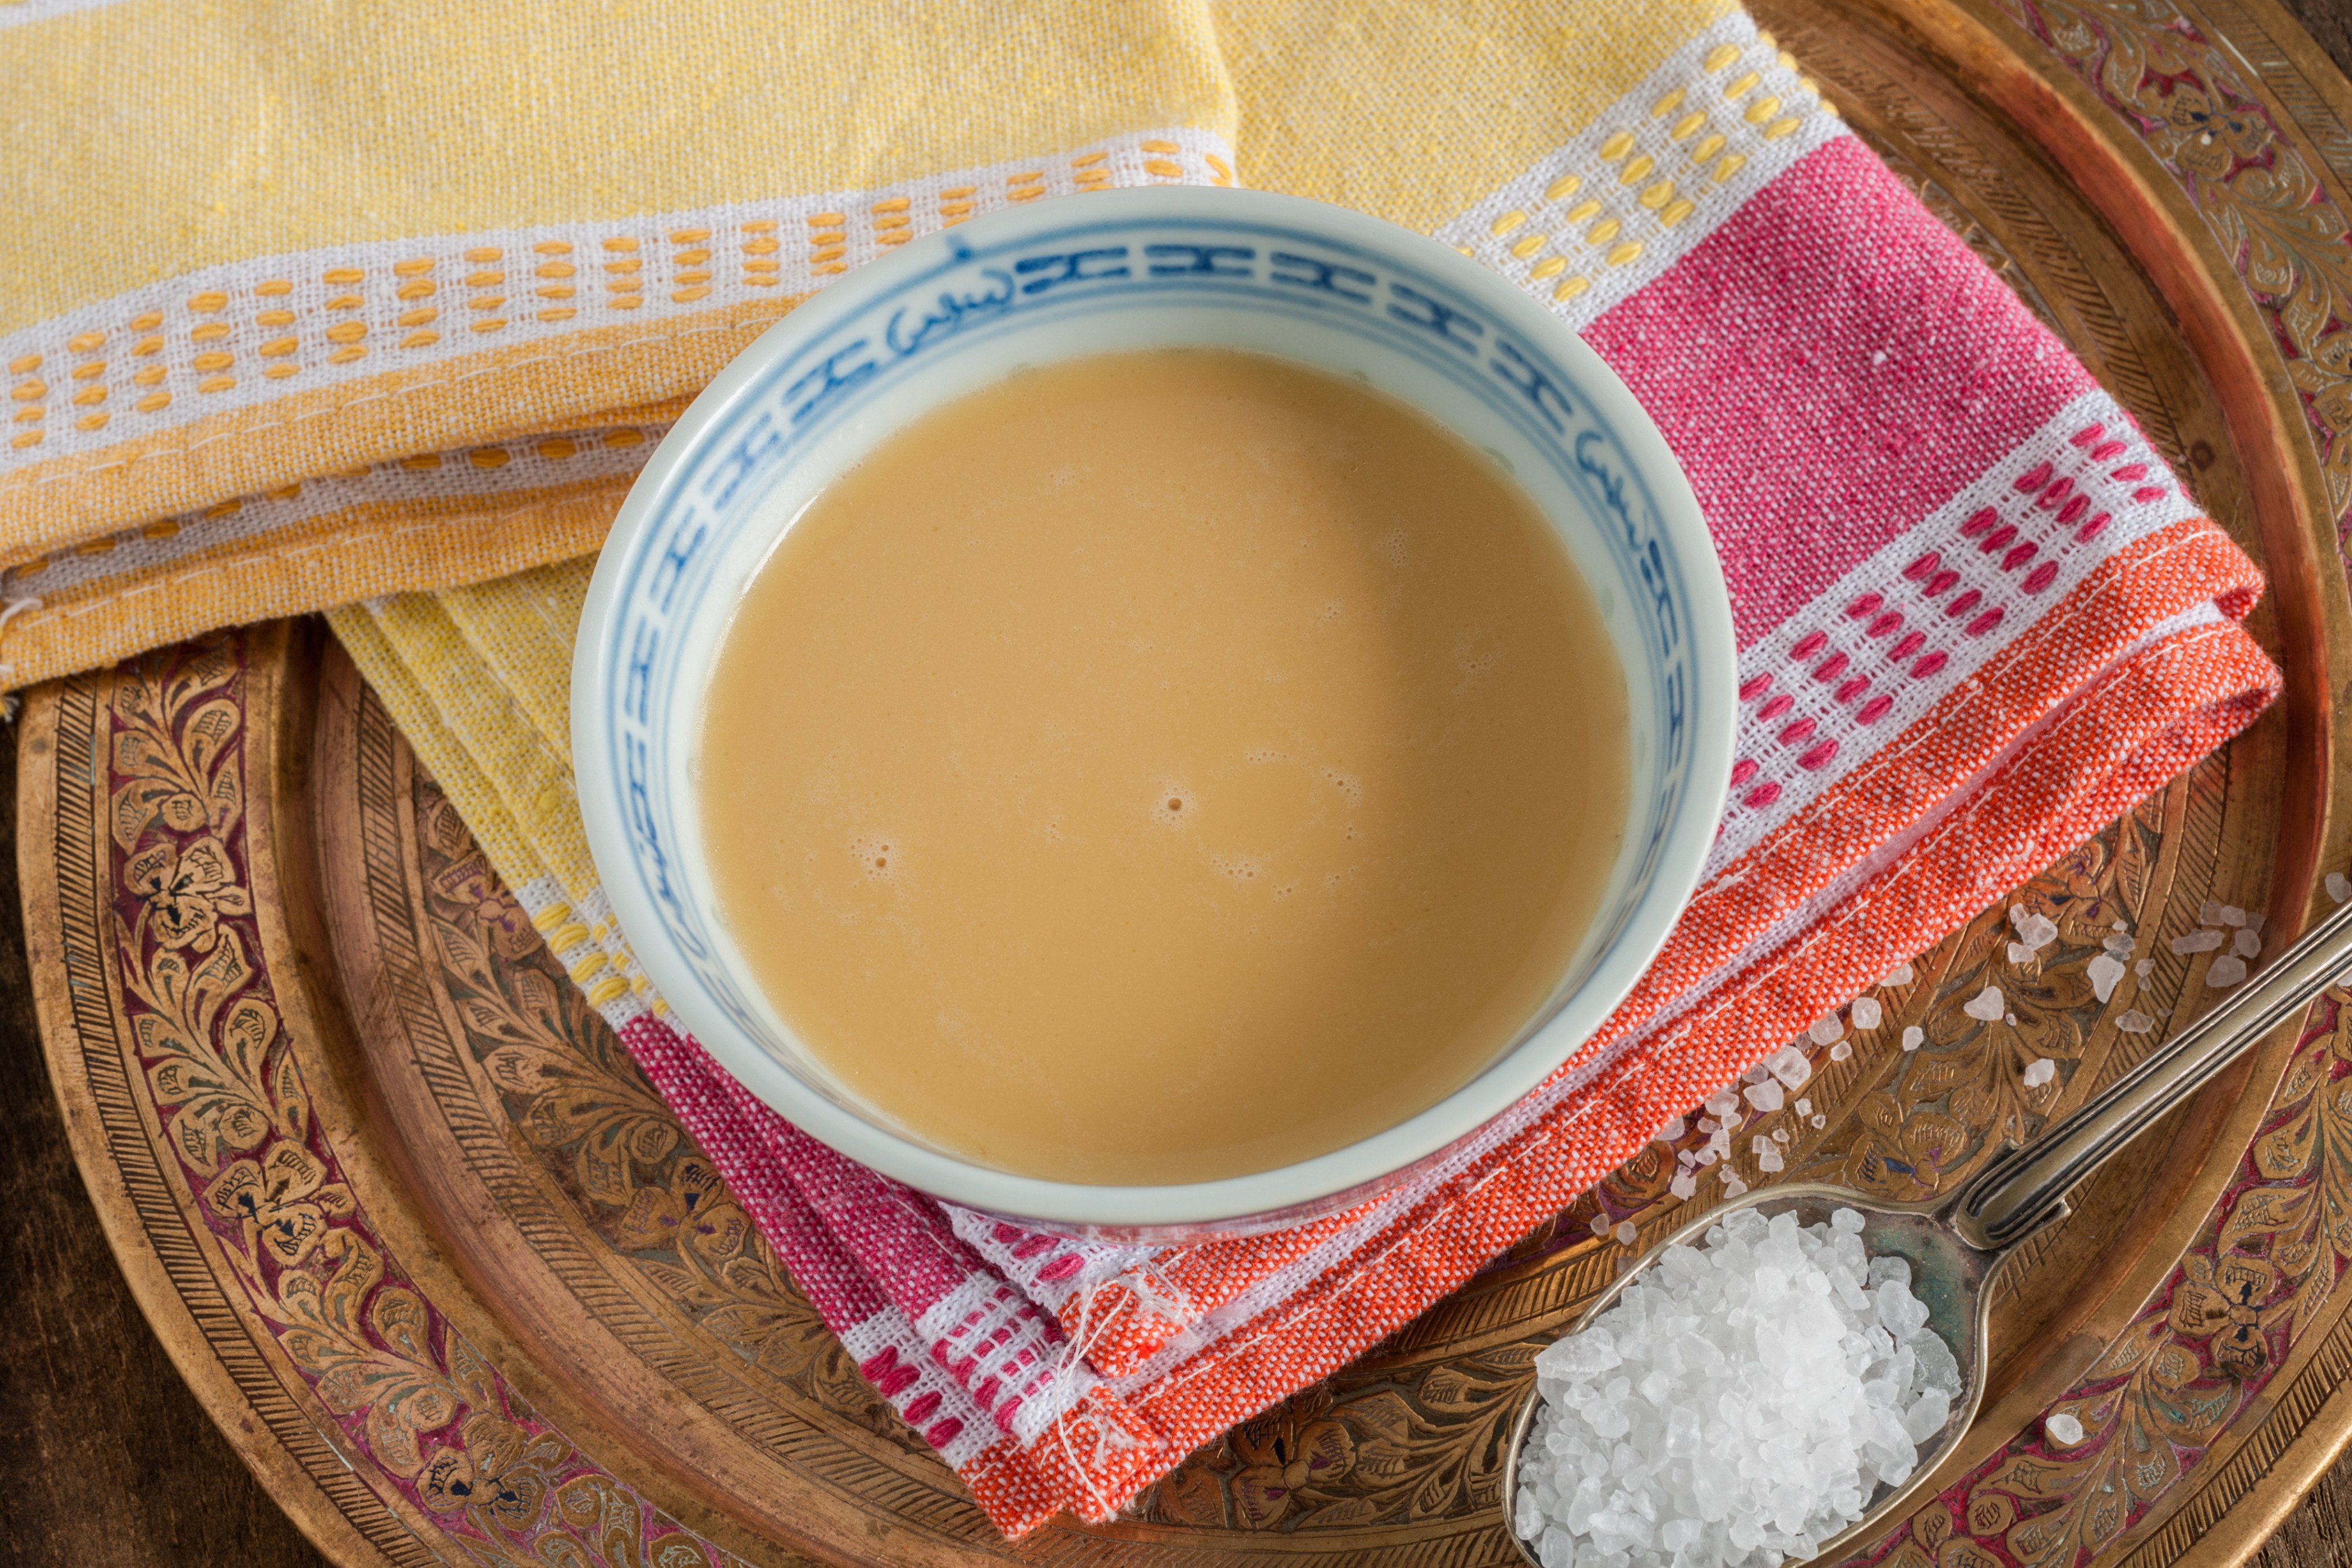 A cup of salty Tibetan tea made with yak butter. It’s not the only tea in Asia served with salt added. Britons who waded into a recent social media debate over the practice only showed how out of touch they were. Photo: Shutterstock